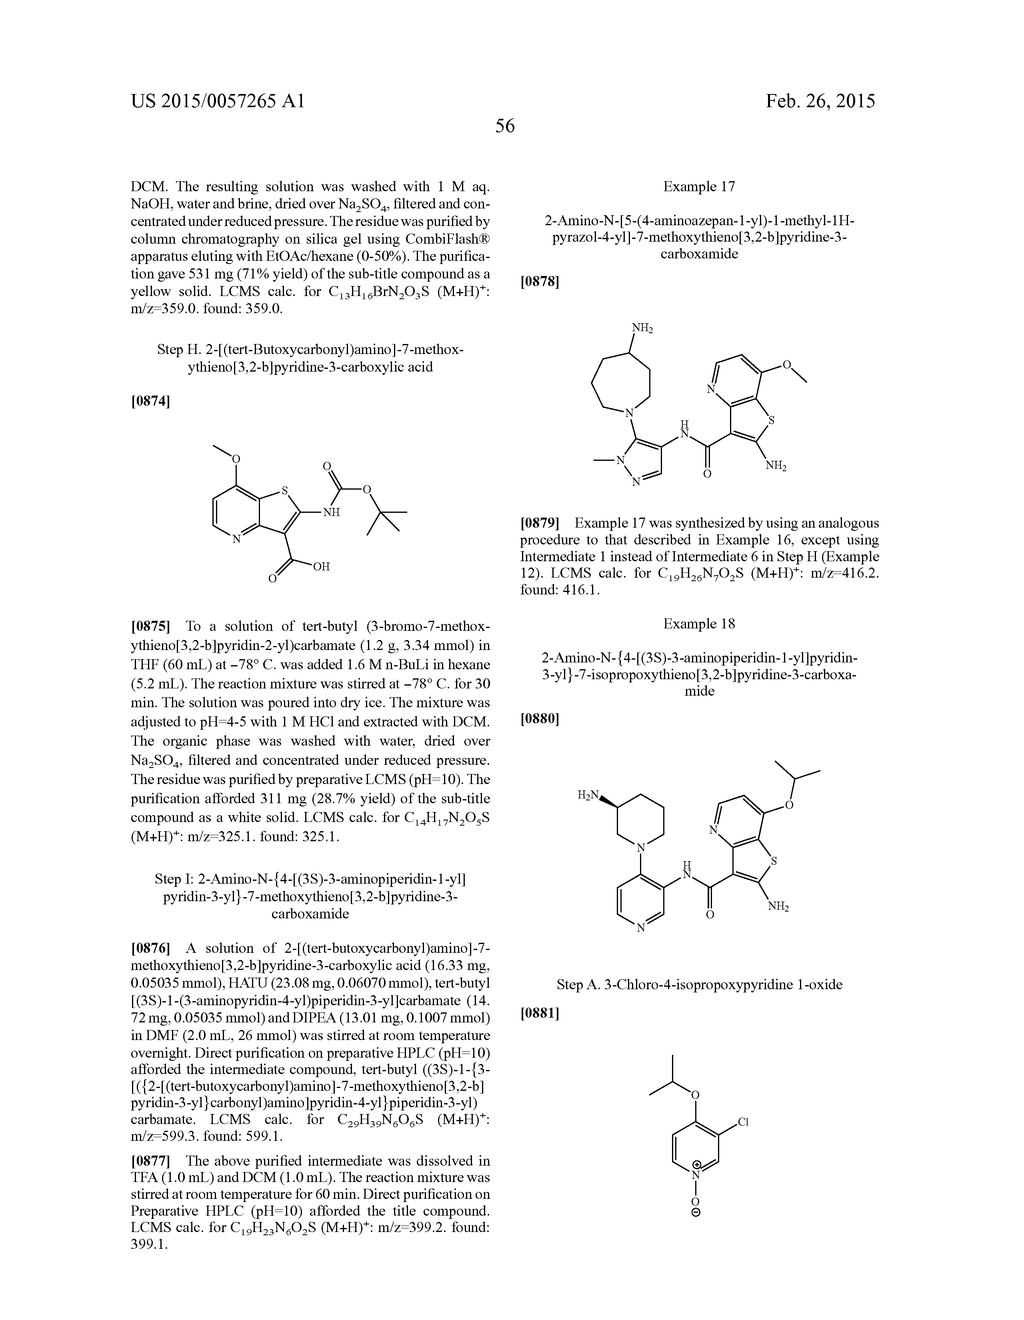 FURO- AND THIENO-PYRIDINE CARBOXAMIDE COMPOUNDS USEFUL AS PIM KINASE     INHIBITORS - diagram, schematic, and image 57